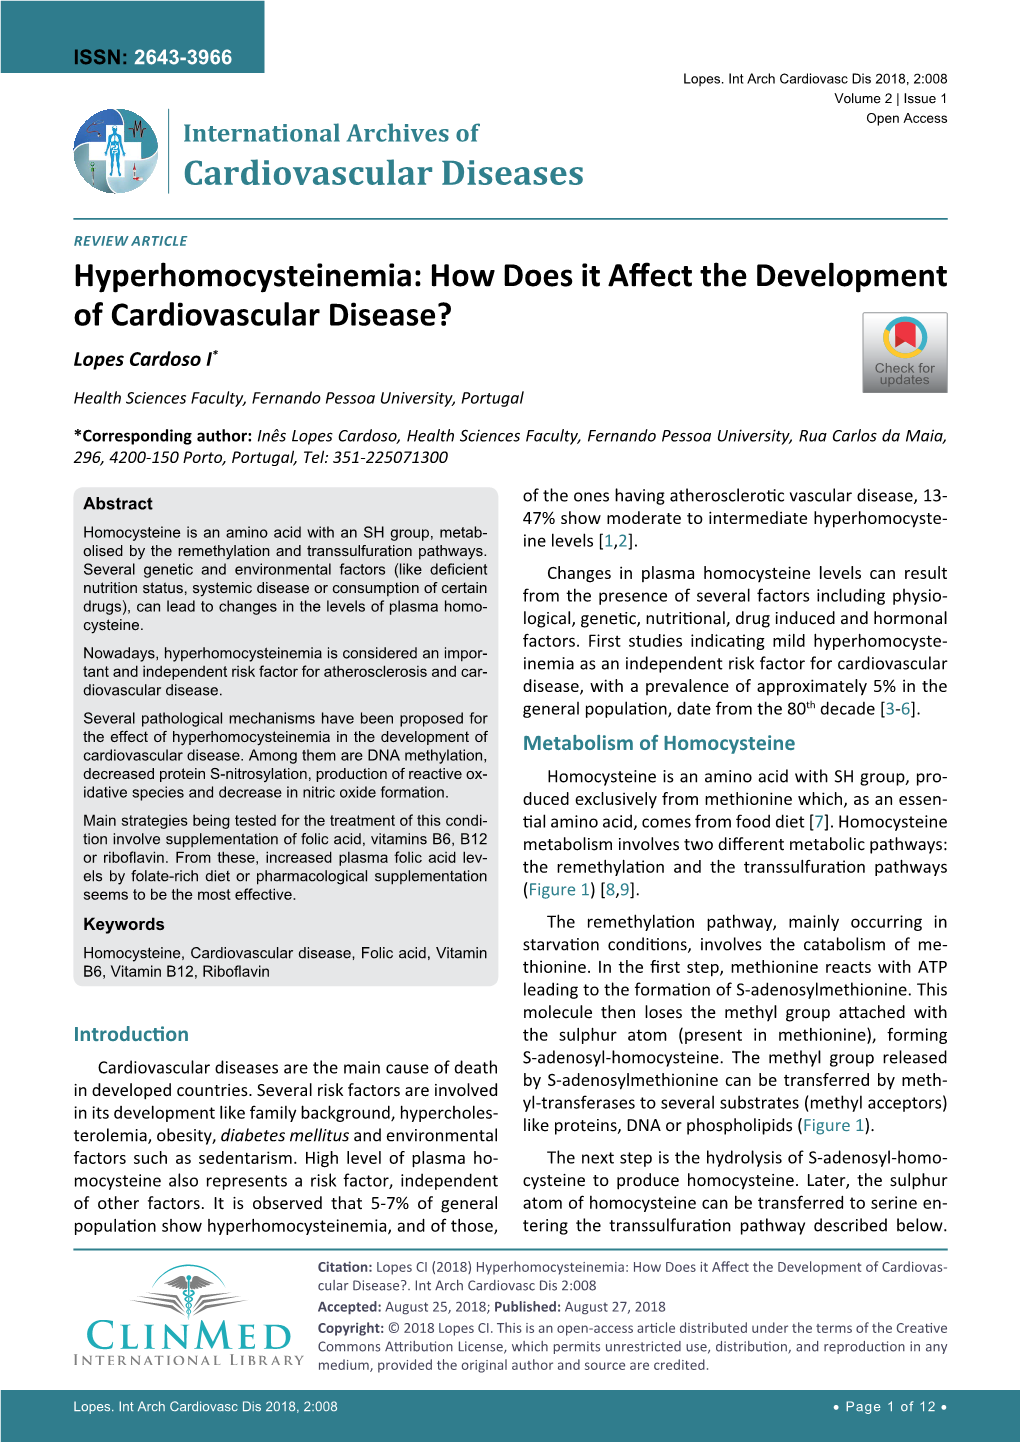 Hyperhomocysteinemia: How Does It Affect the Development of Cardiovascular Disease?